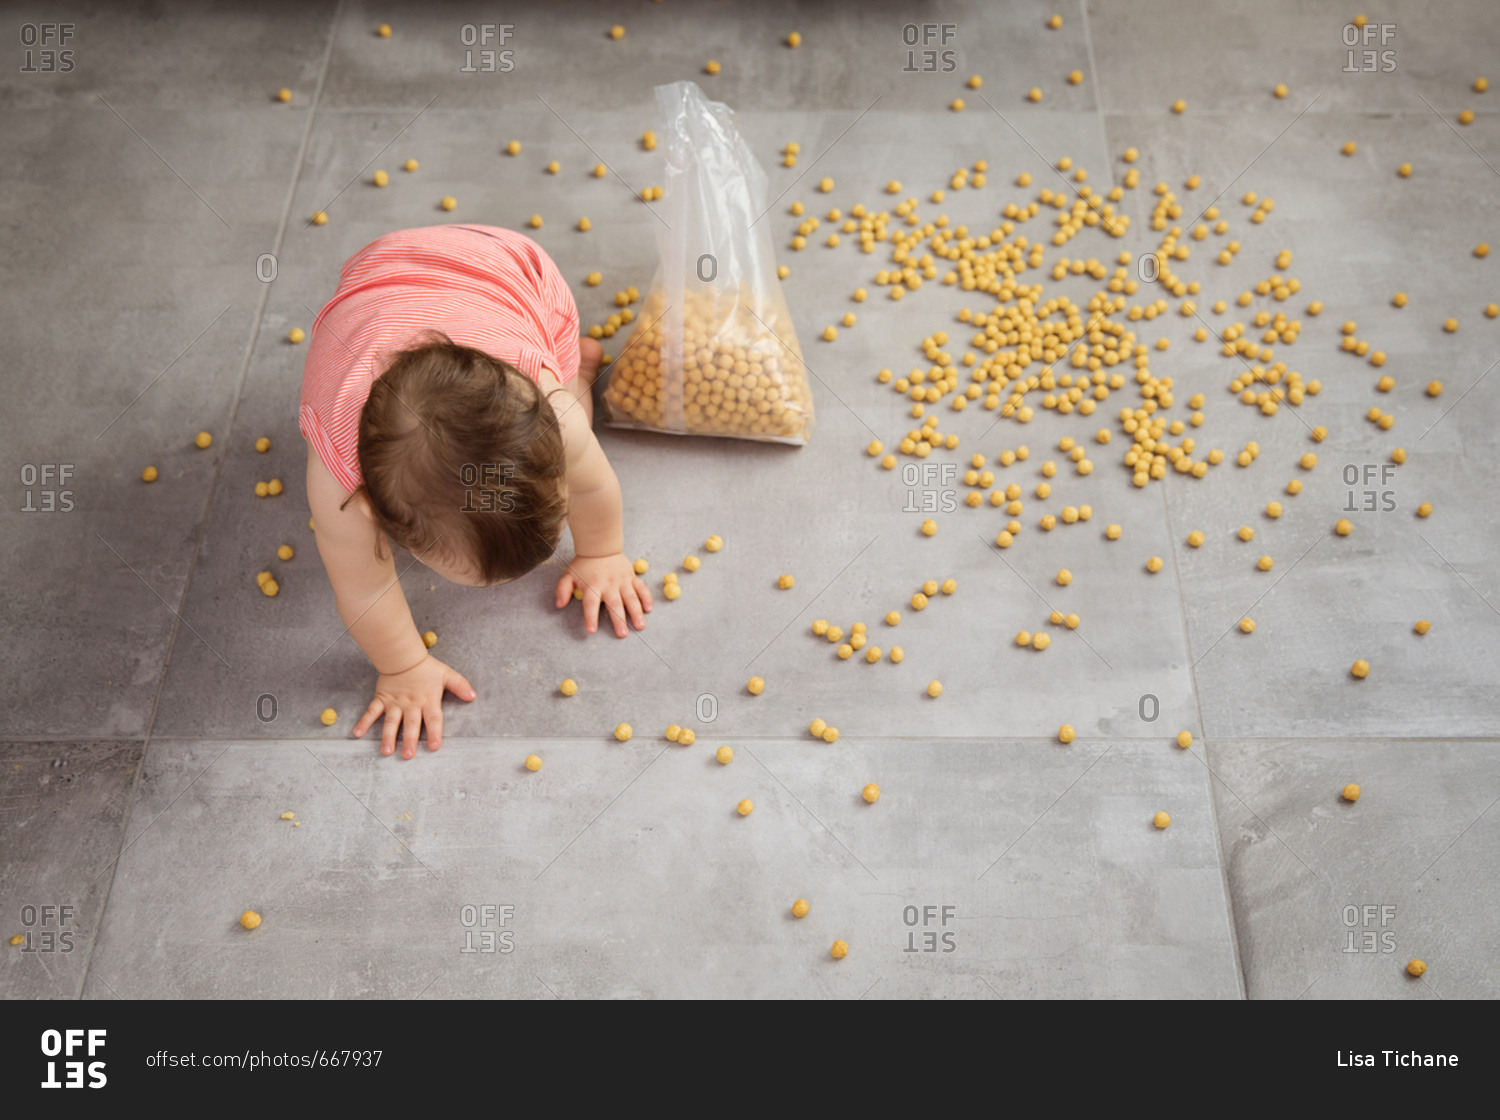 High angle view of baby crawling in spilled cereal